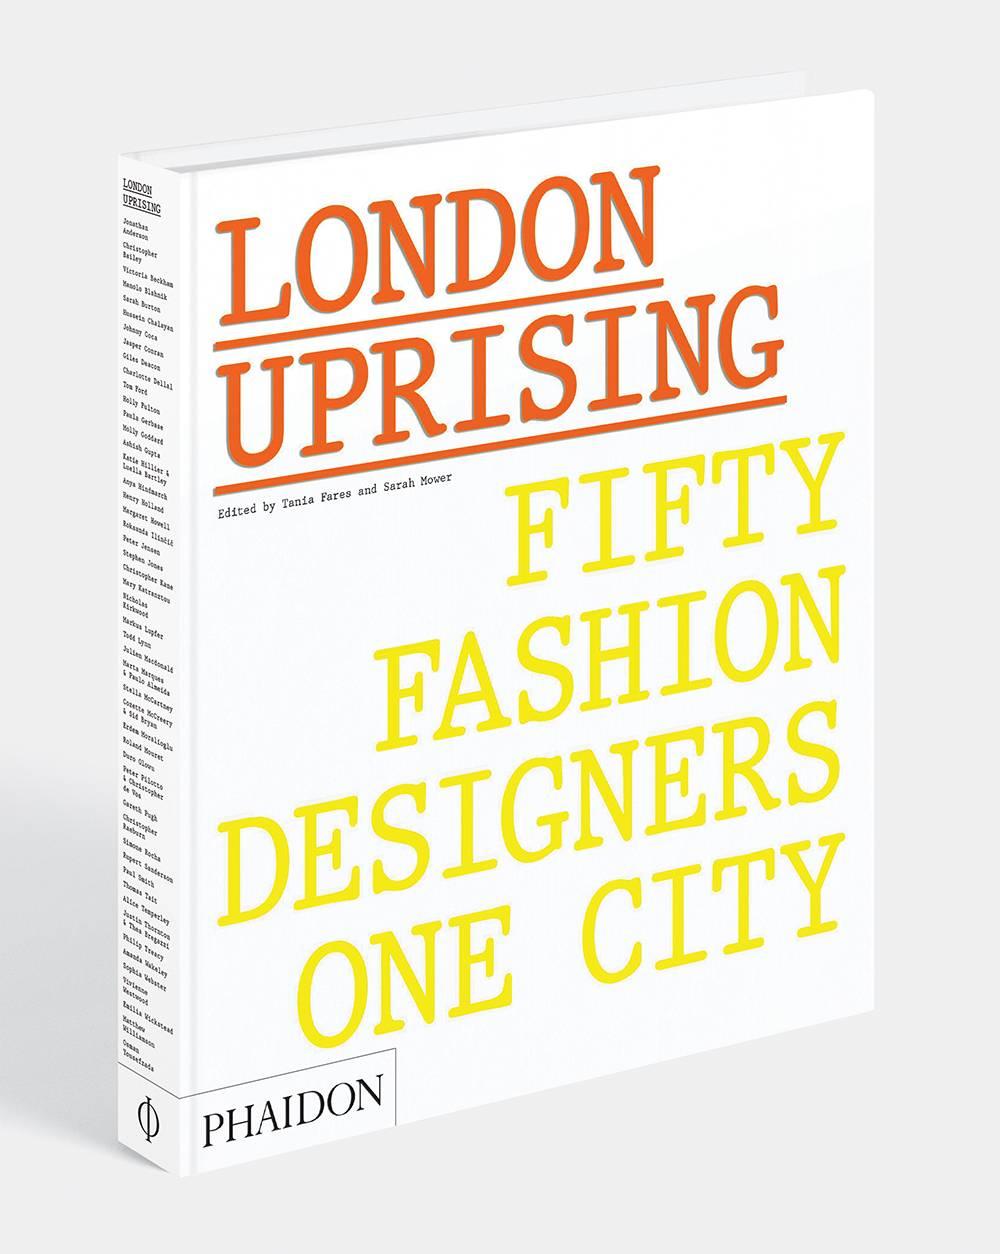 Contemporary London Uprising-Fifty Fashion Designers, One City Book For Sale